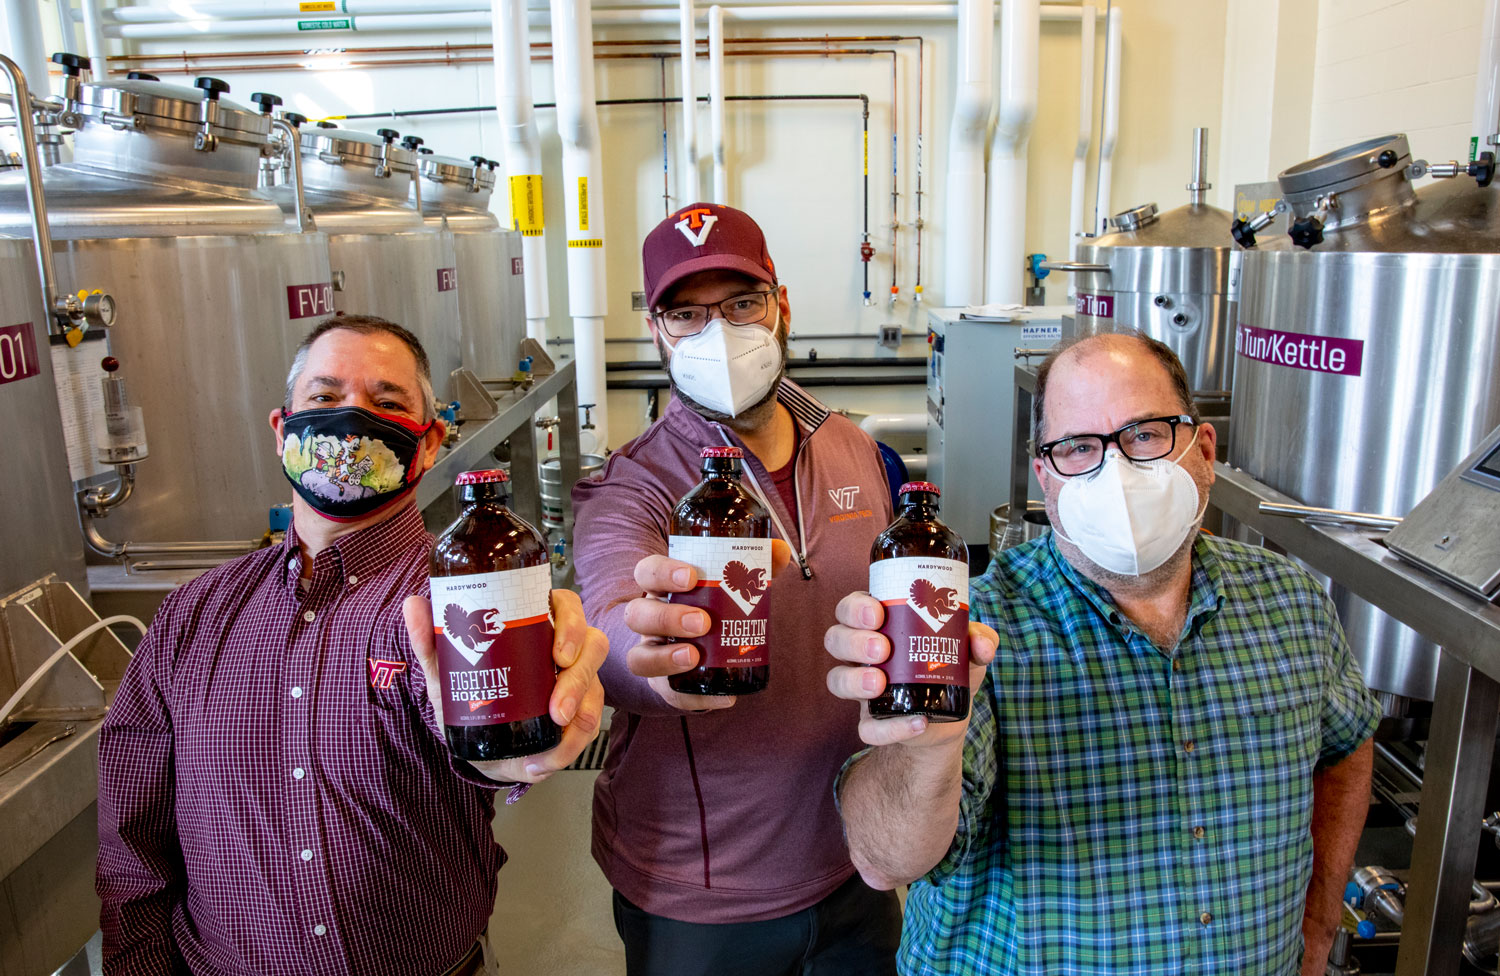 Three faculty members in the College of Agriculture and Life Sciences’ Department of Food Sciences and Technology collaborated to develop the recipe for Fightin’ Hokies Lager. From left, Herbert Bruce, Brian Wiersema, and Sean O’Keefe hold stubby bottles of the Fightin’ Hokies Lager. Zeke Barlow, Virginia Tech